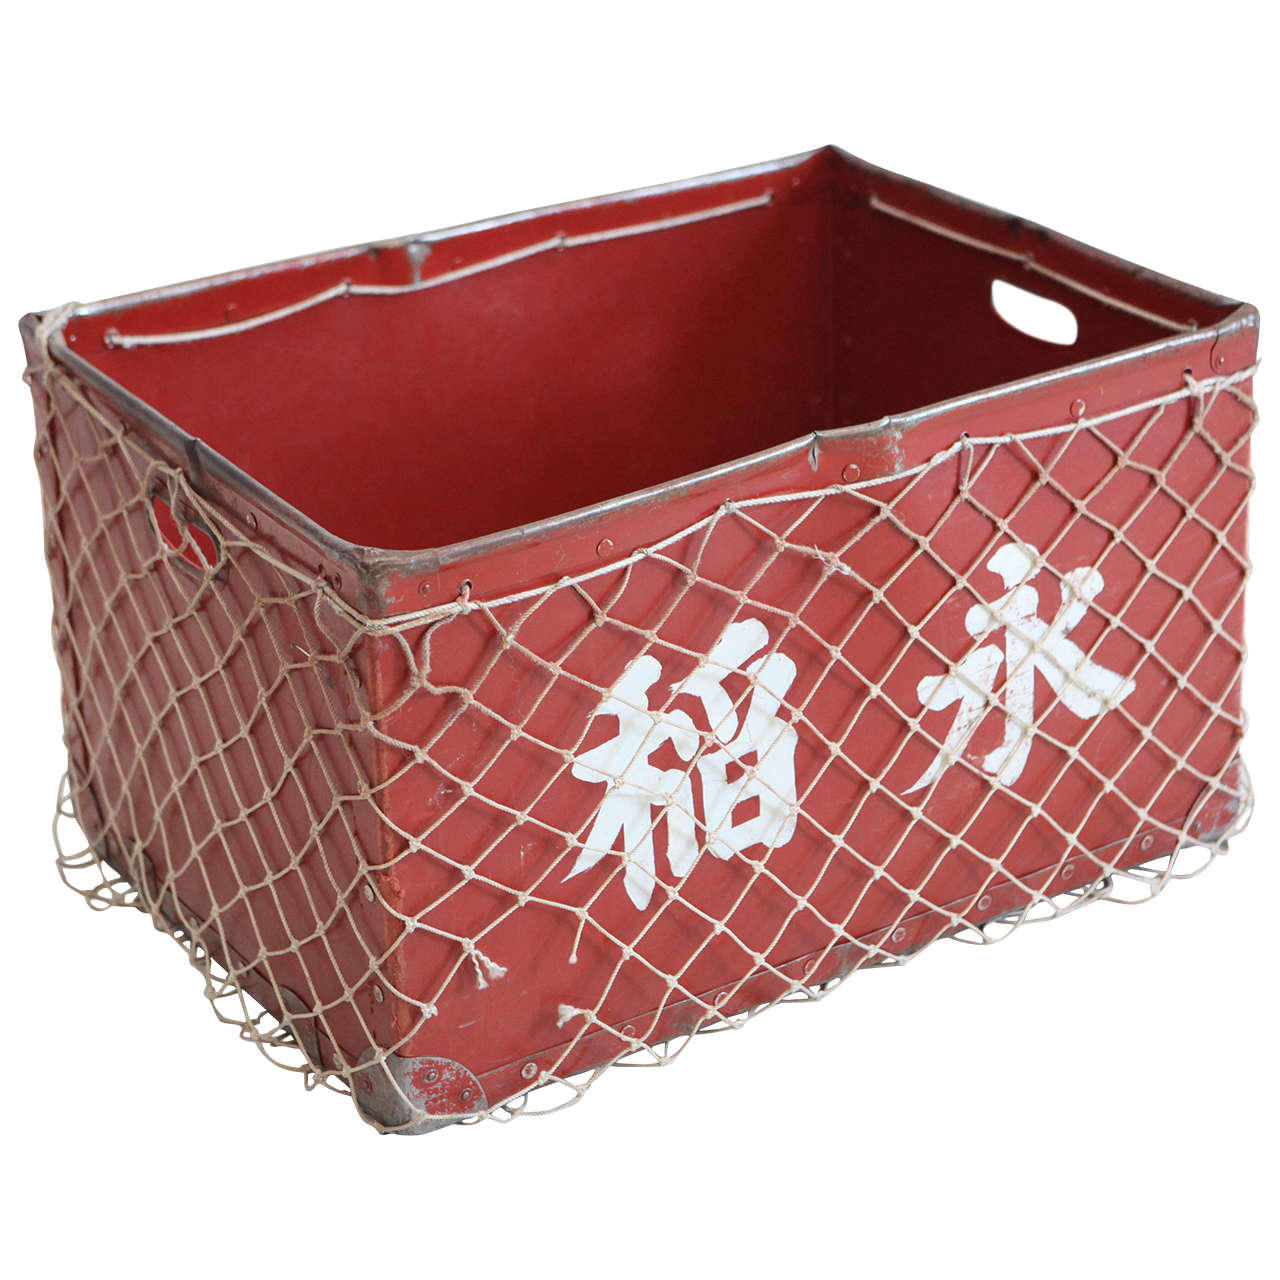 Japanese Red Metal Mail Box with Rope Wrap